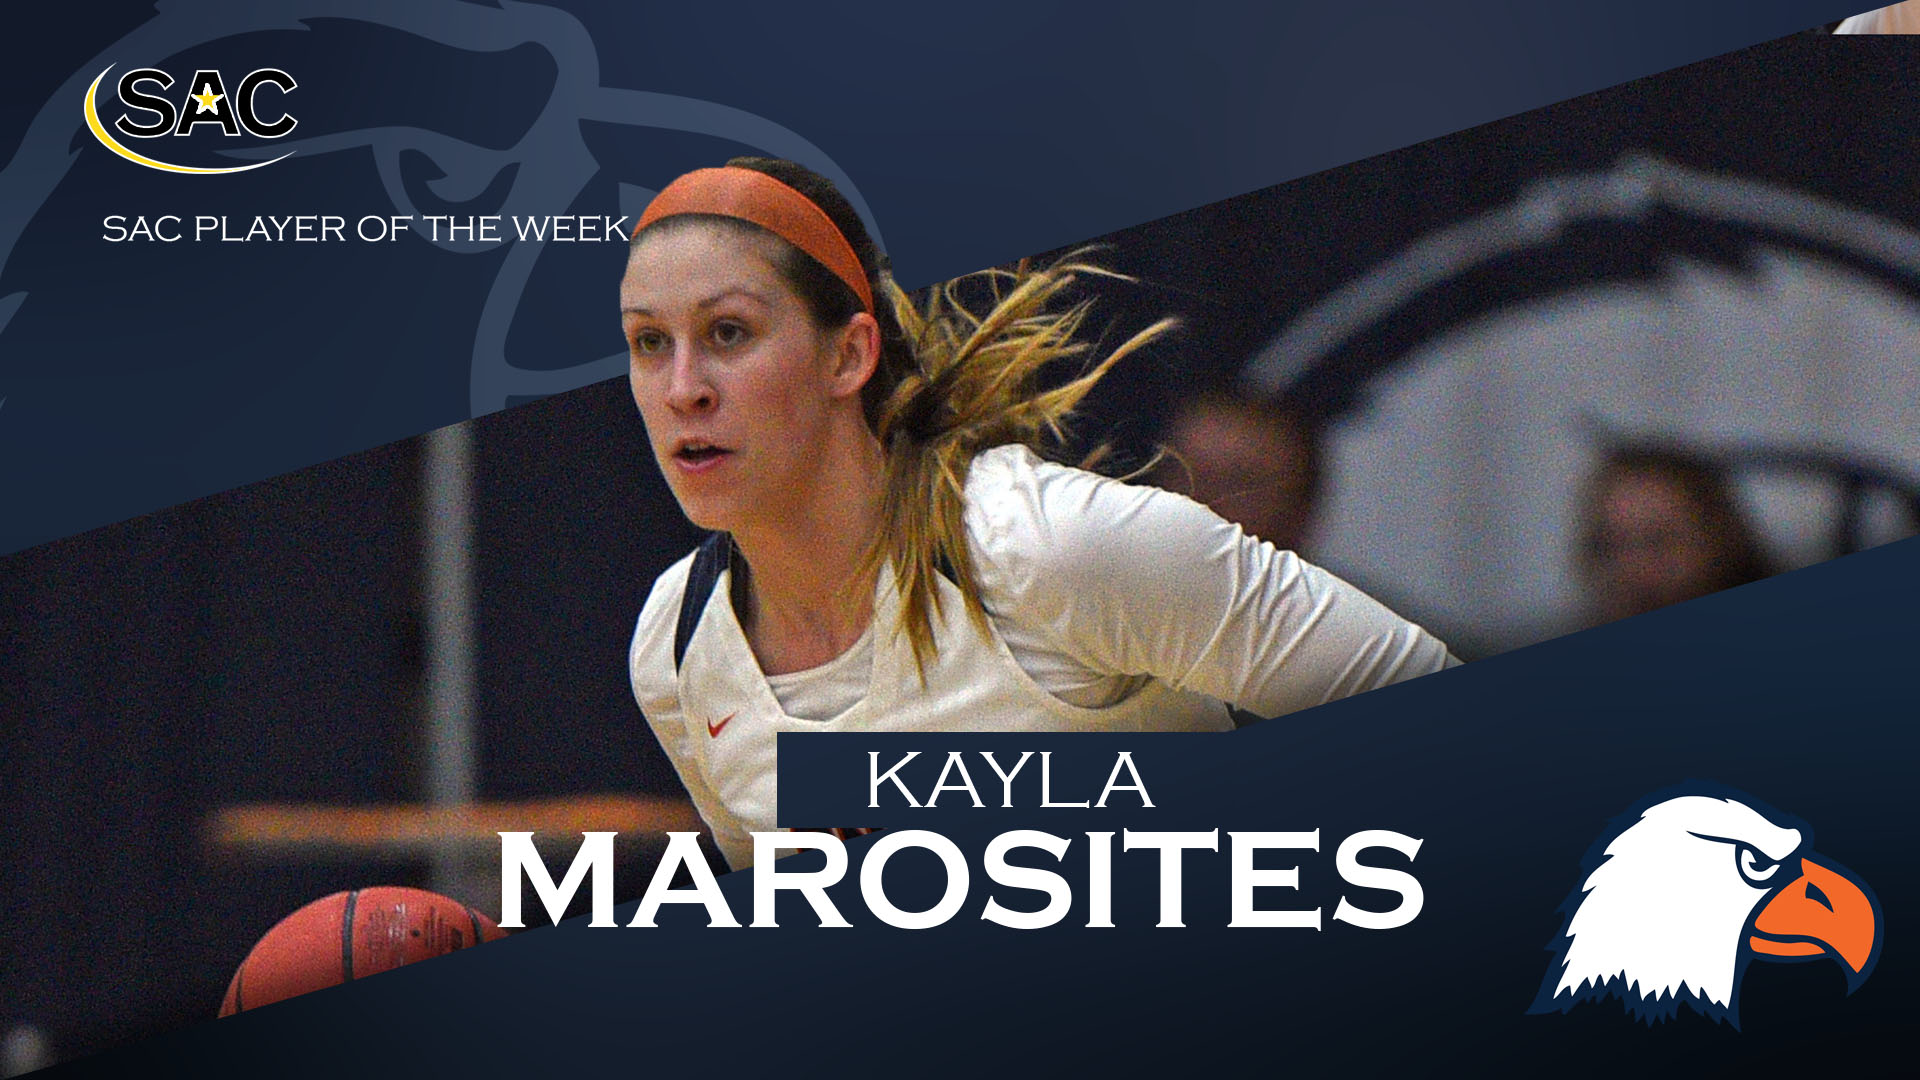 Marosites nets fourth career SAC Player of the Week